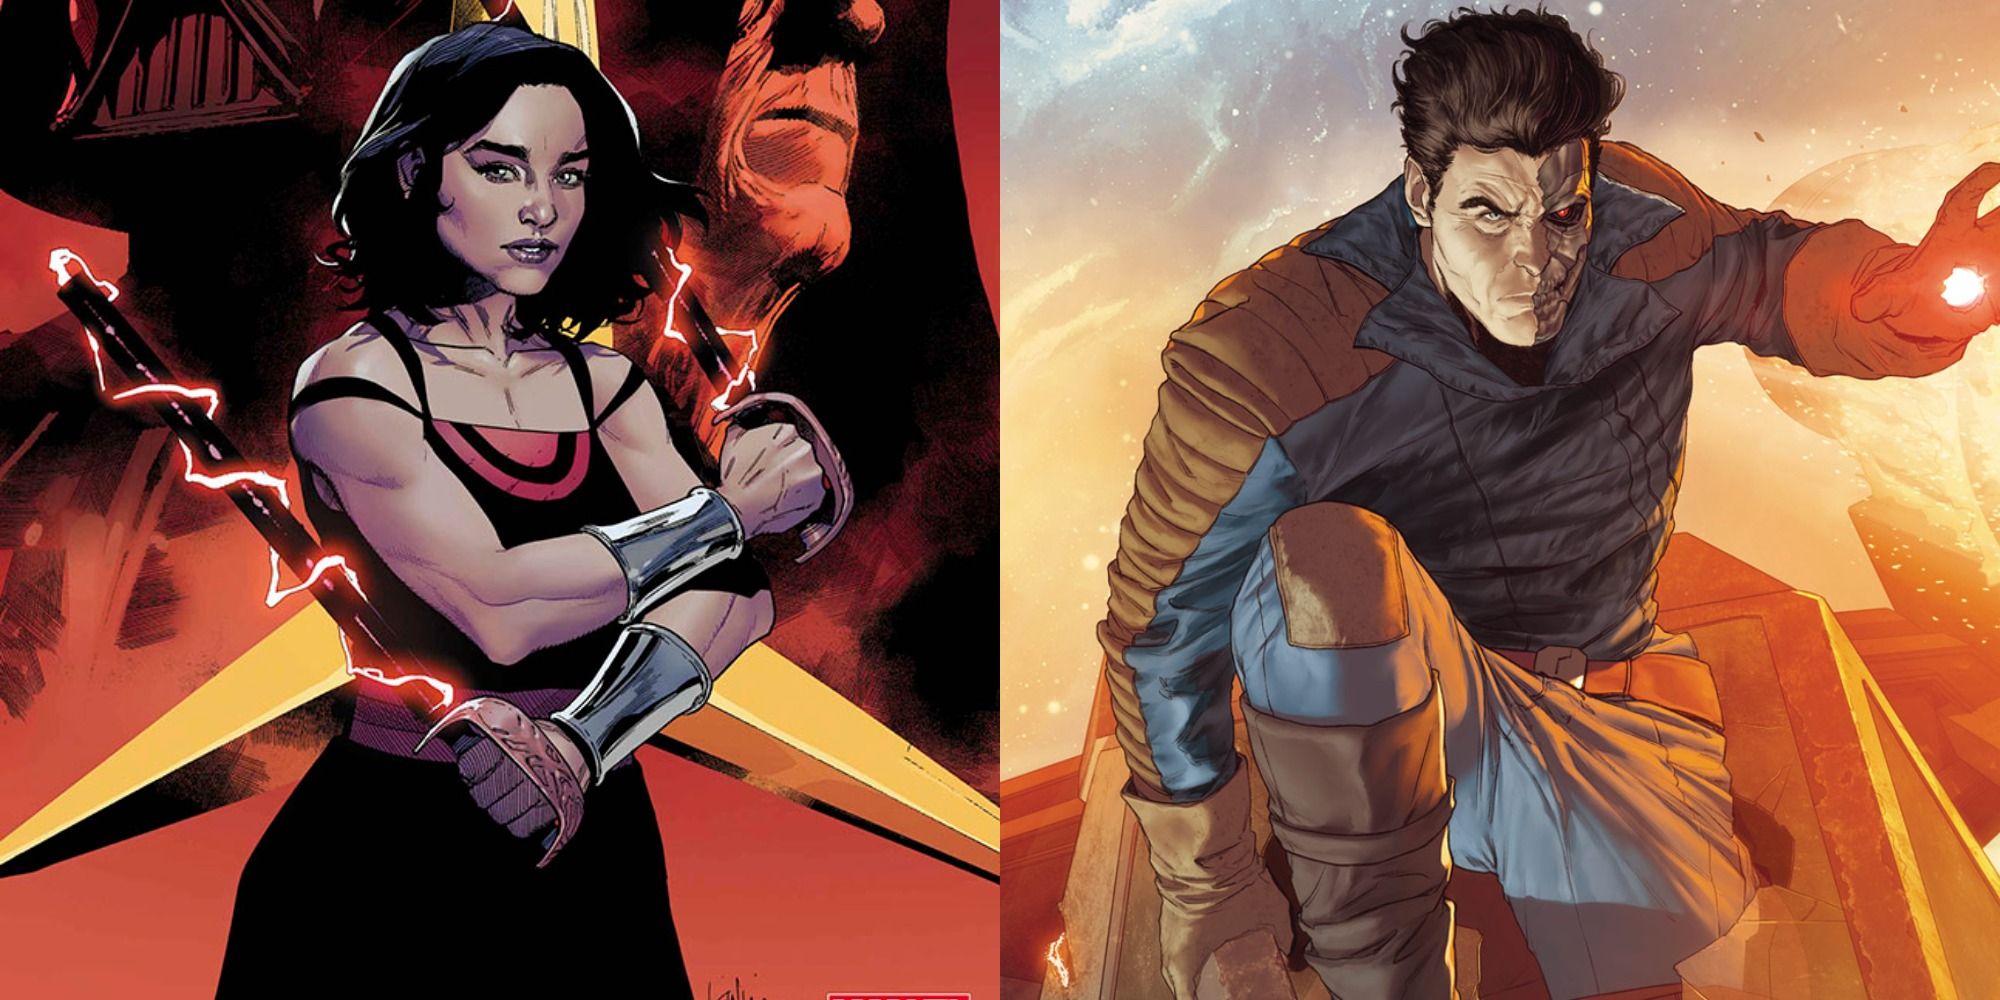 Split image showing Qi'ra and Beilert Valance in the Star Wars comics.